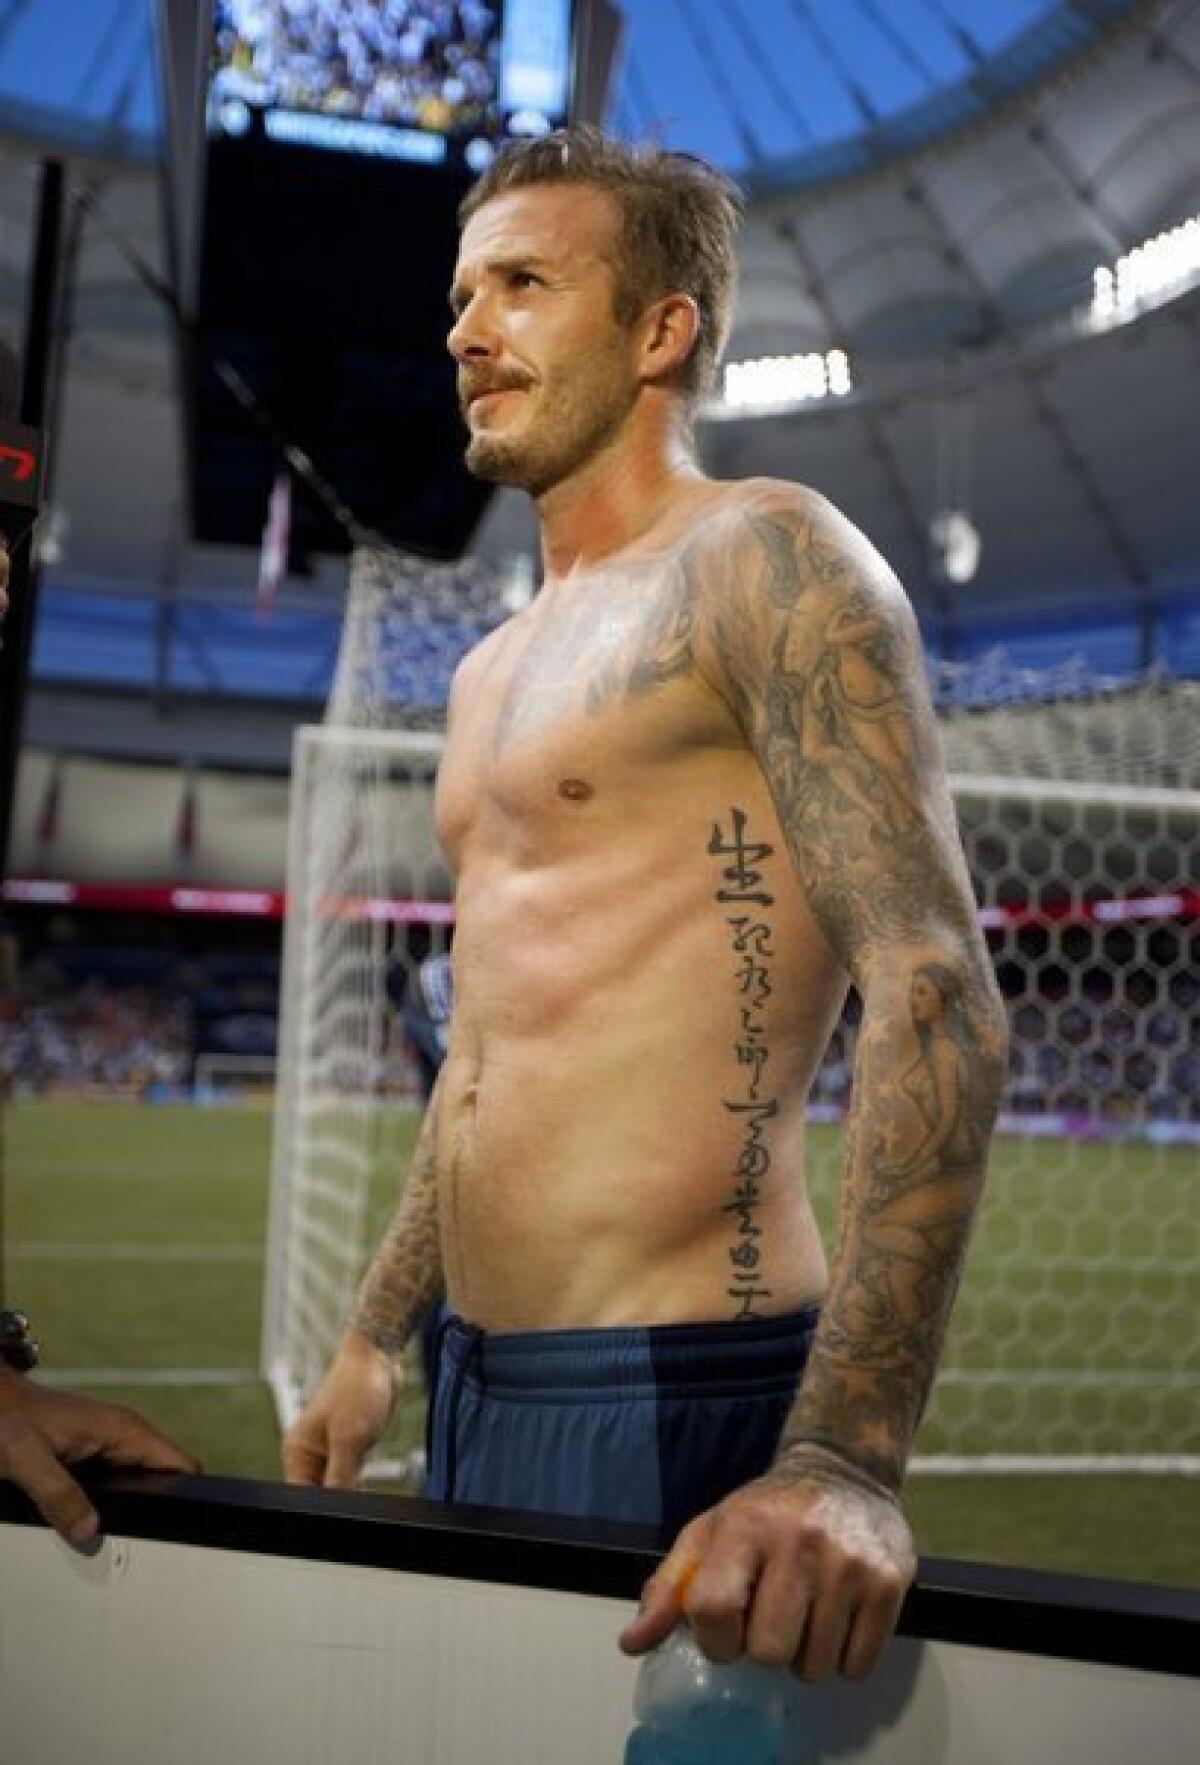 David Beckham, on the sidelines in this file photo, shows the abssets, er, assets, that made him a natural as an underwear designer and model.